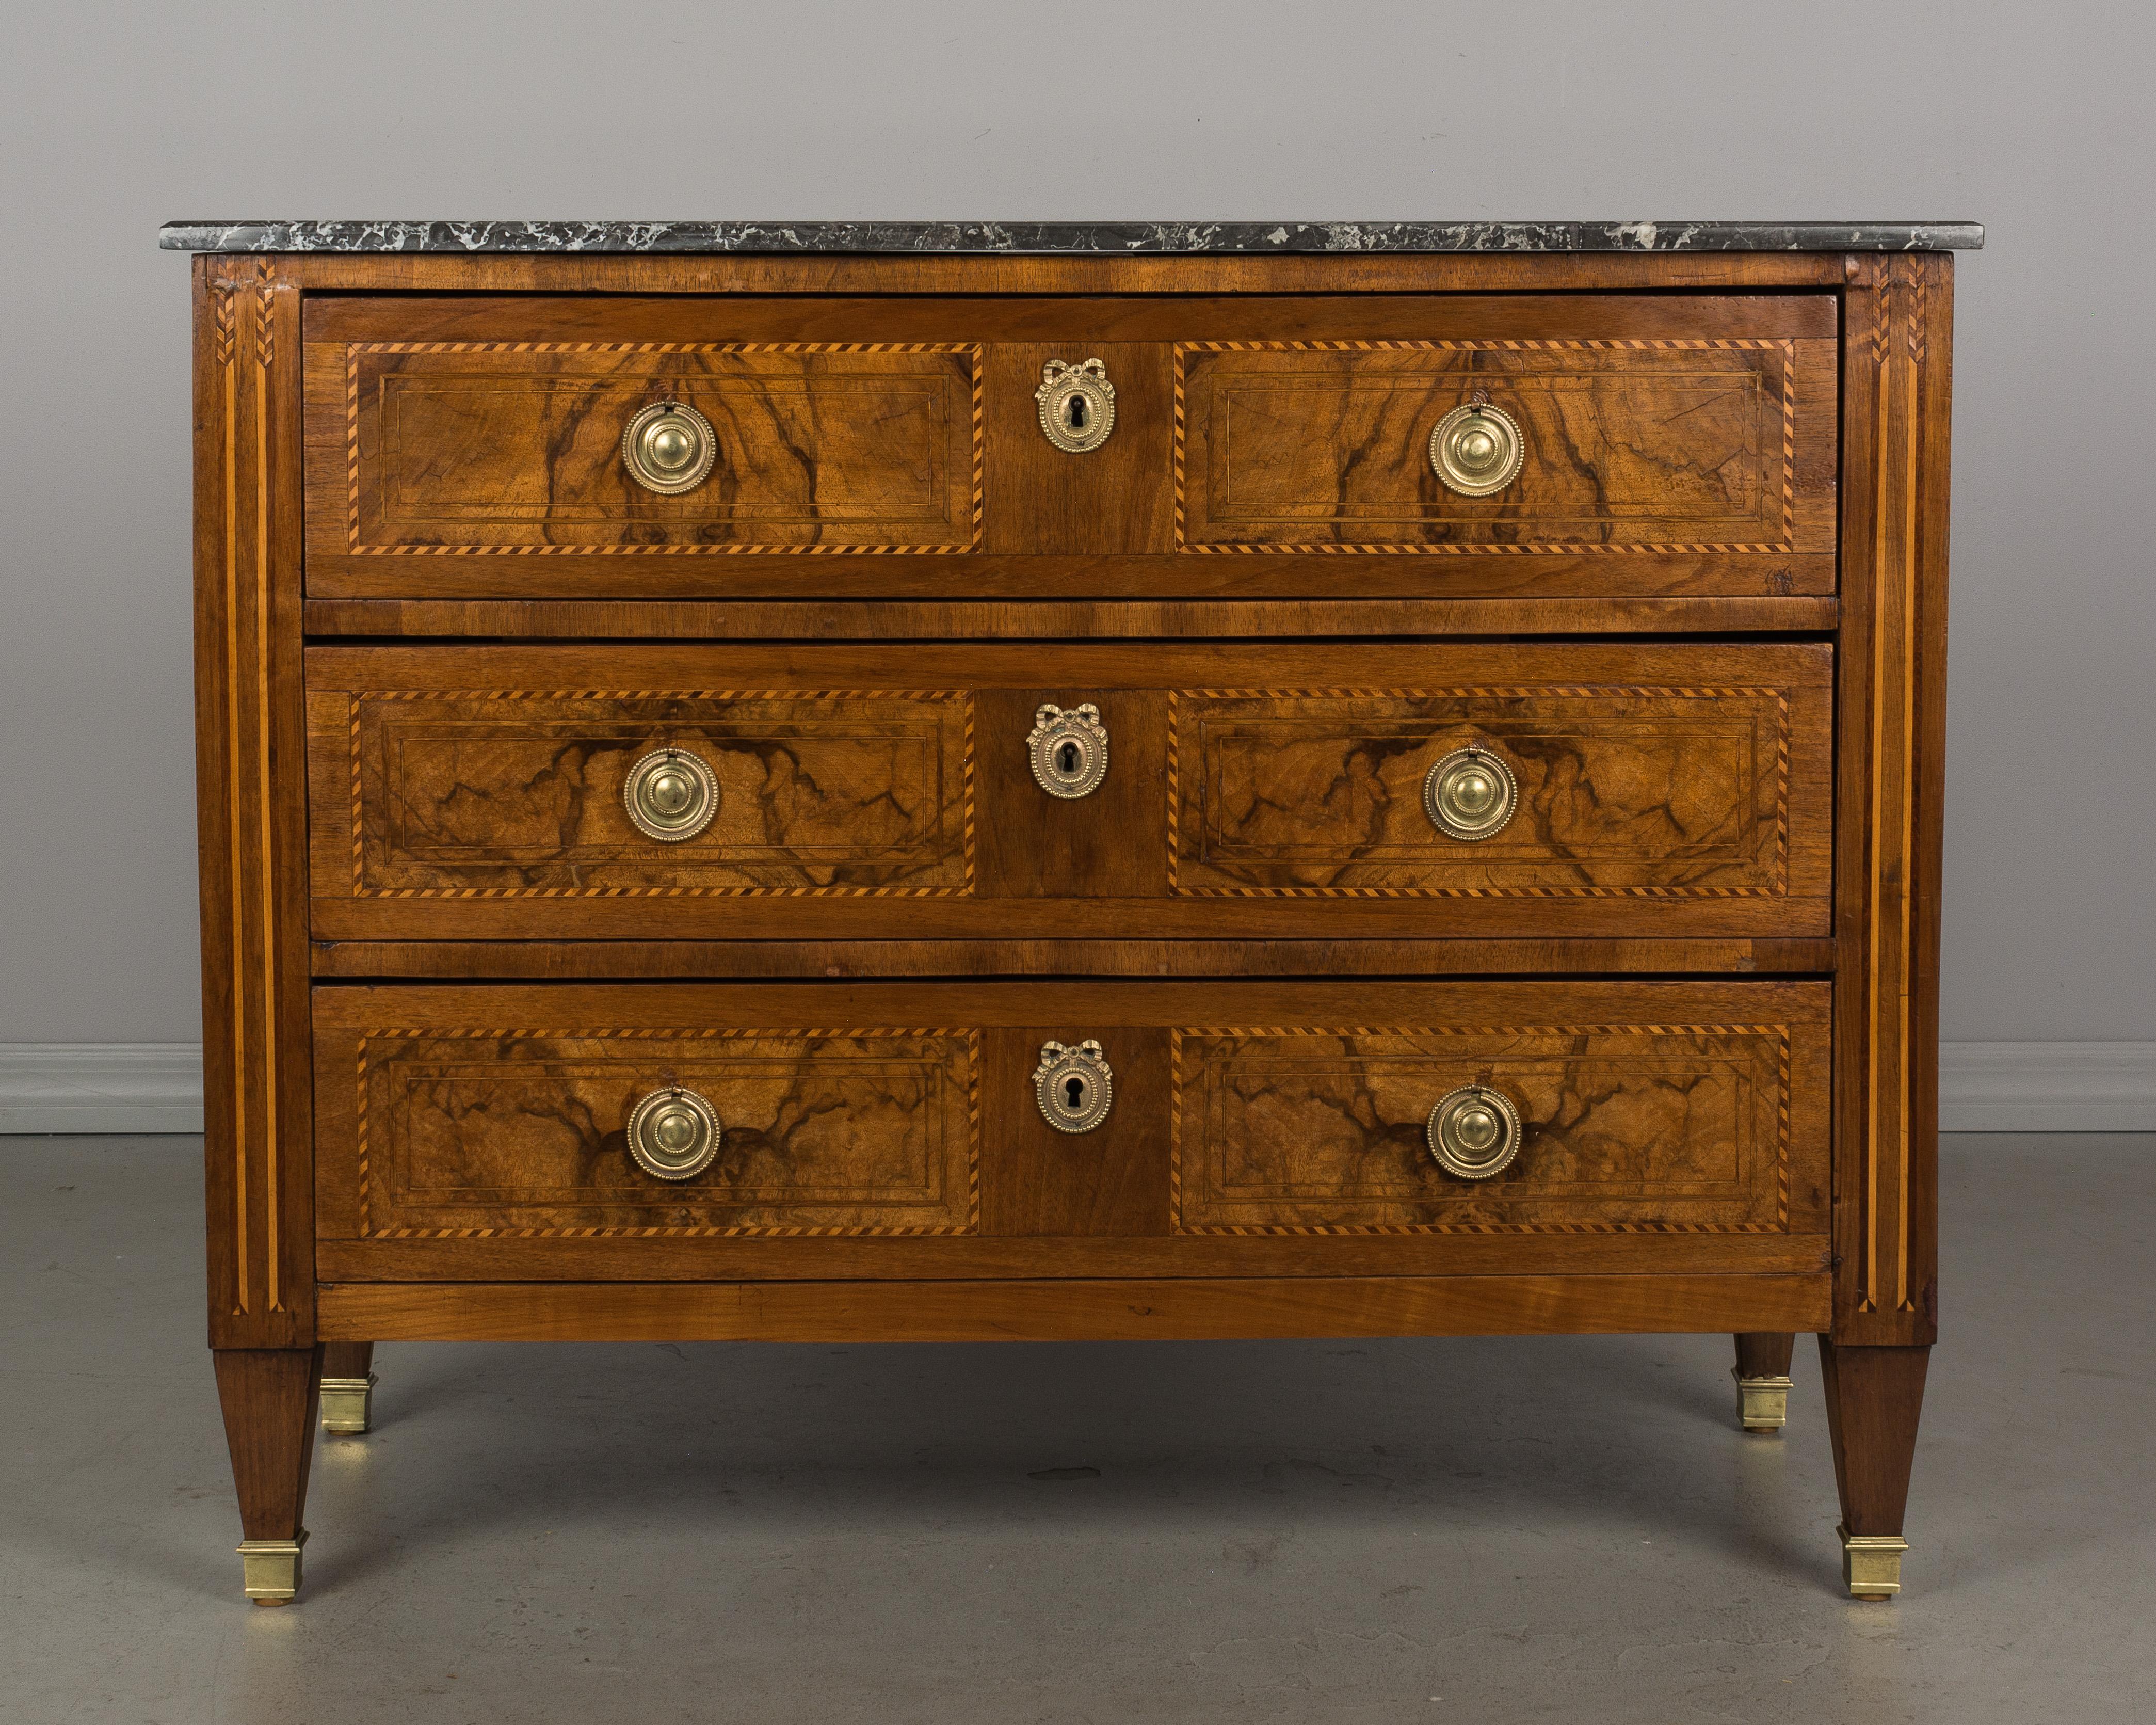 French Early 19th Century Louis XVI Style Marquetry Commode